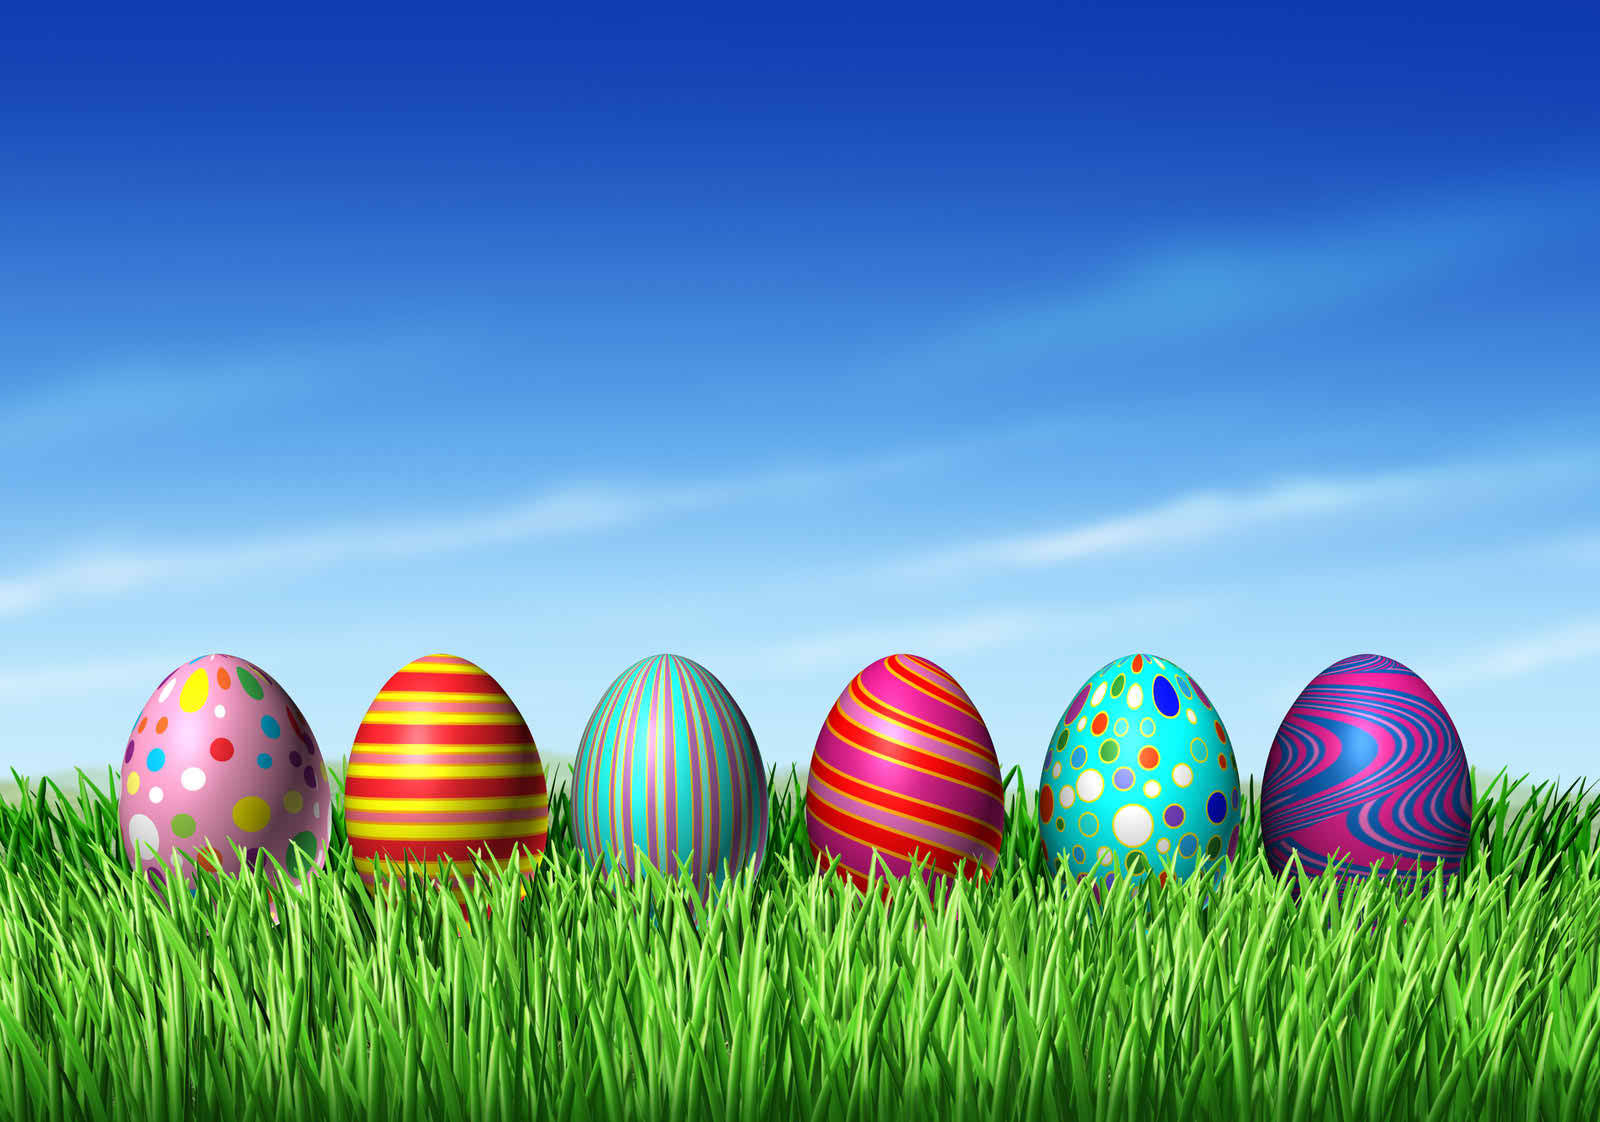 Celebrate Easter With Colorful Eggs! Background